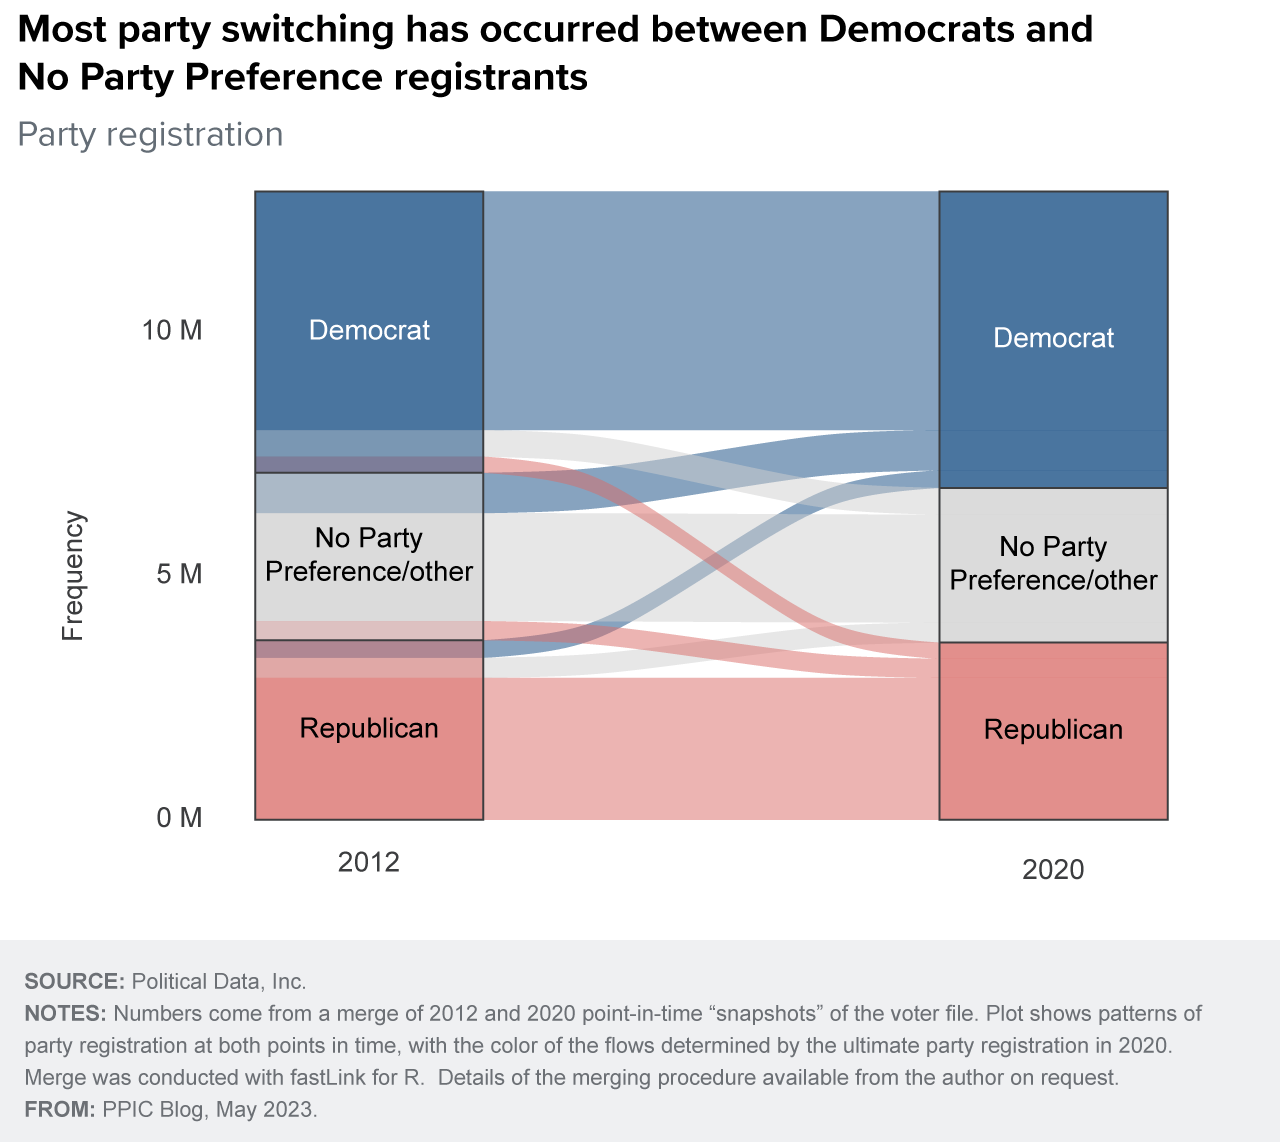 figure - Most party switching has occurred between Democrats and No Party Preference registrants